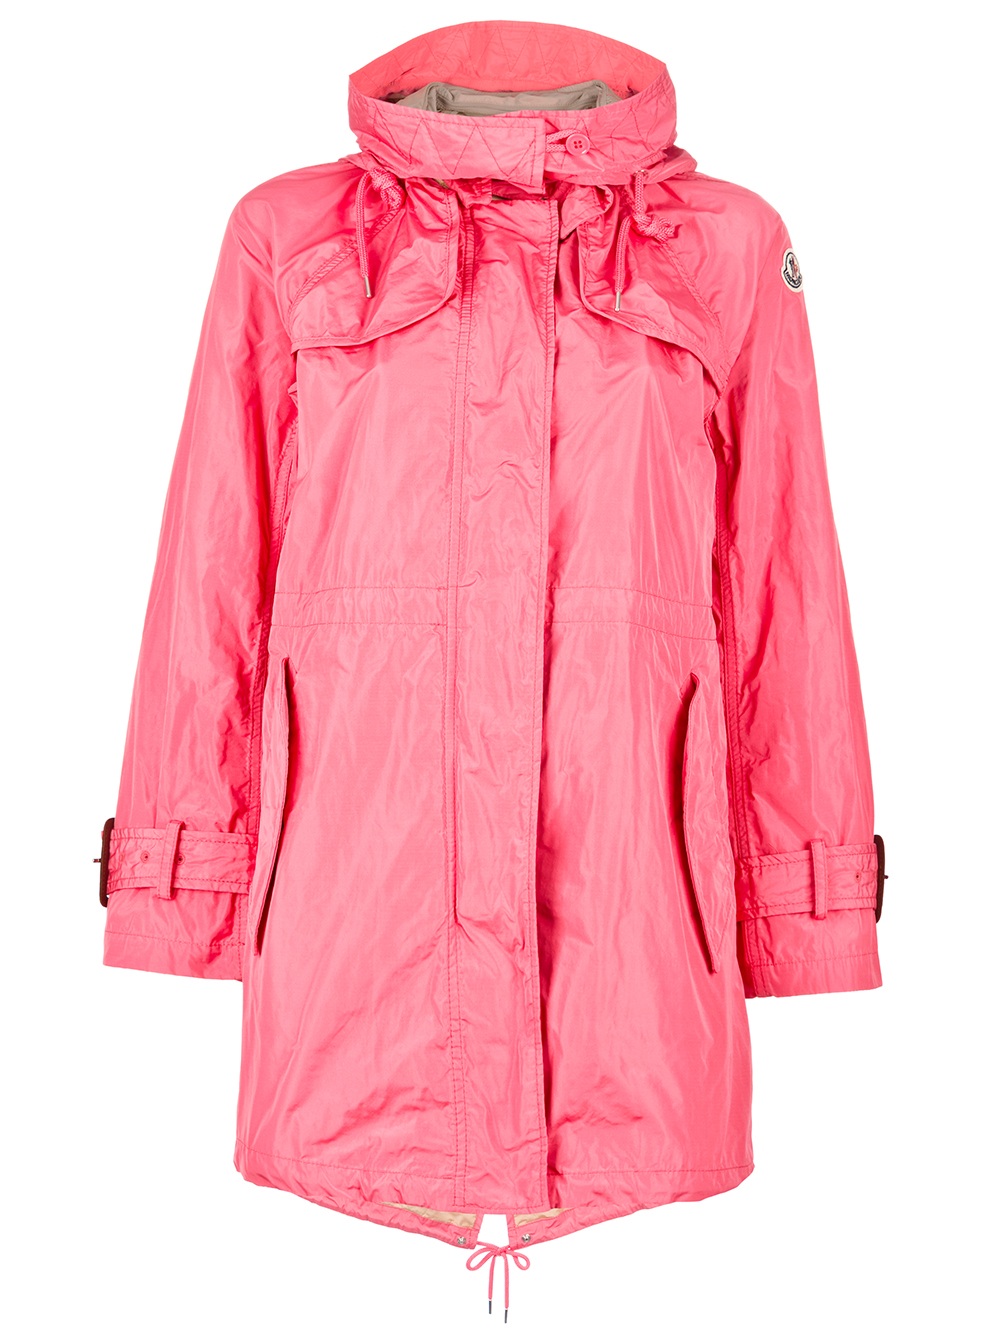 Moncler Scillia Raincoat in Pink (coral) | Lyst